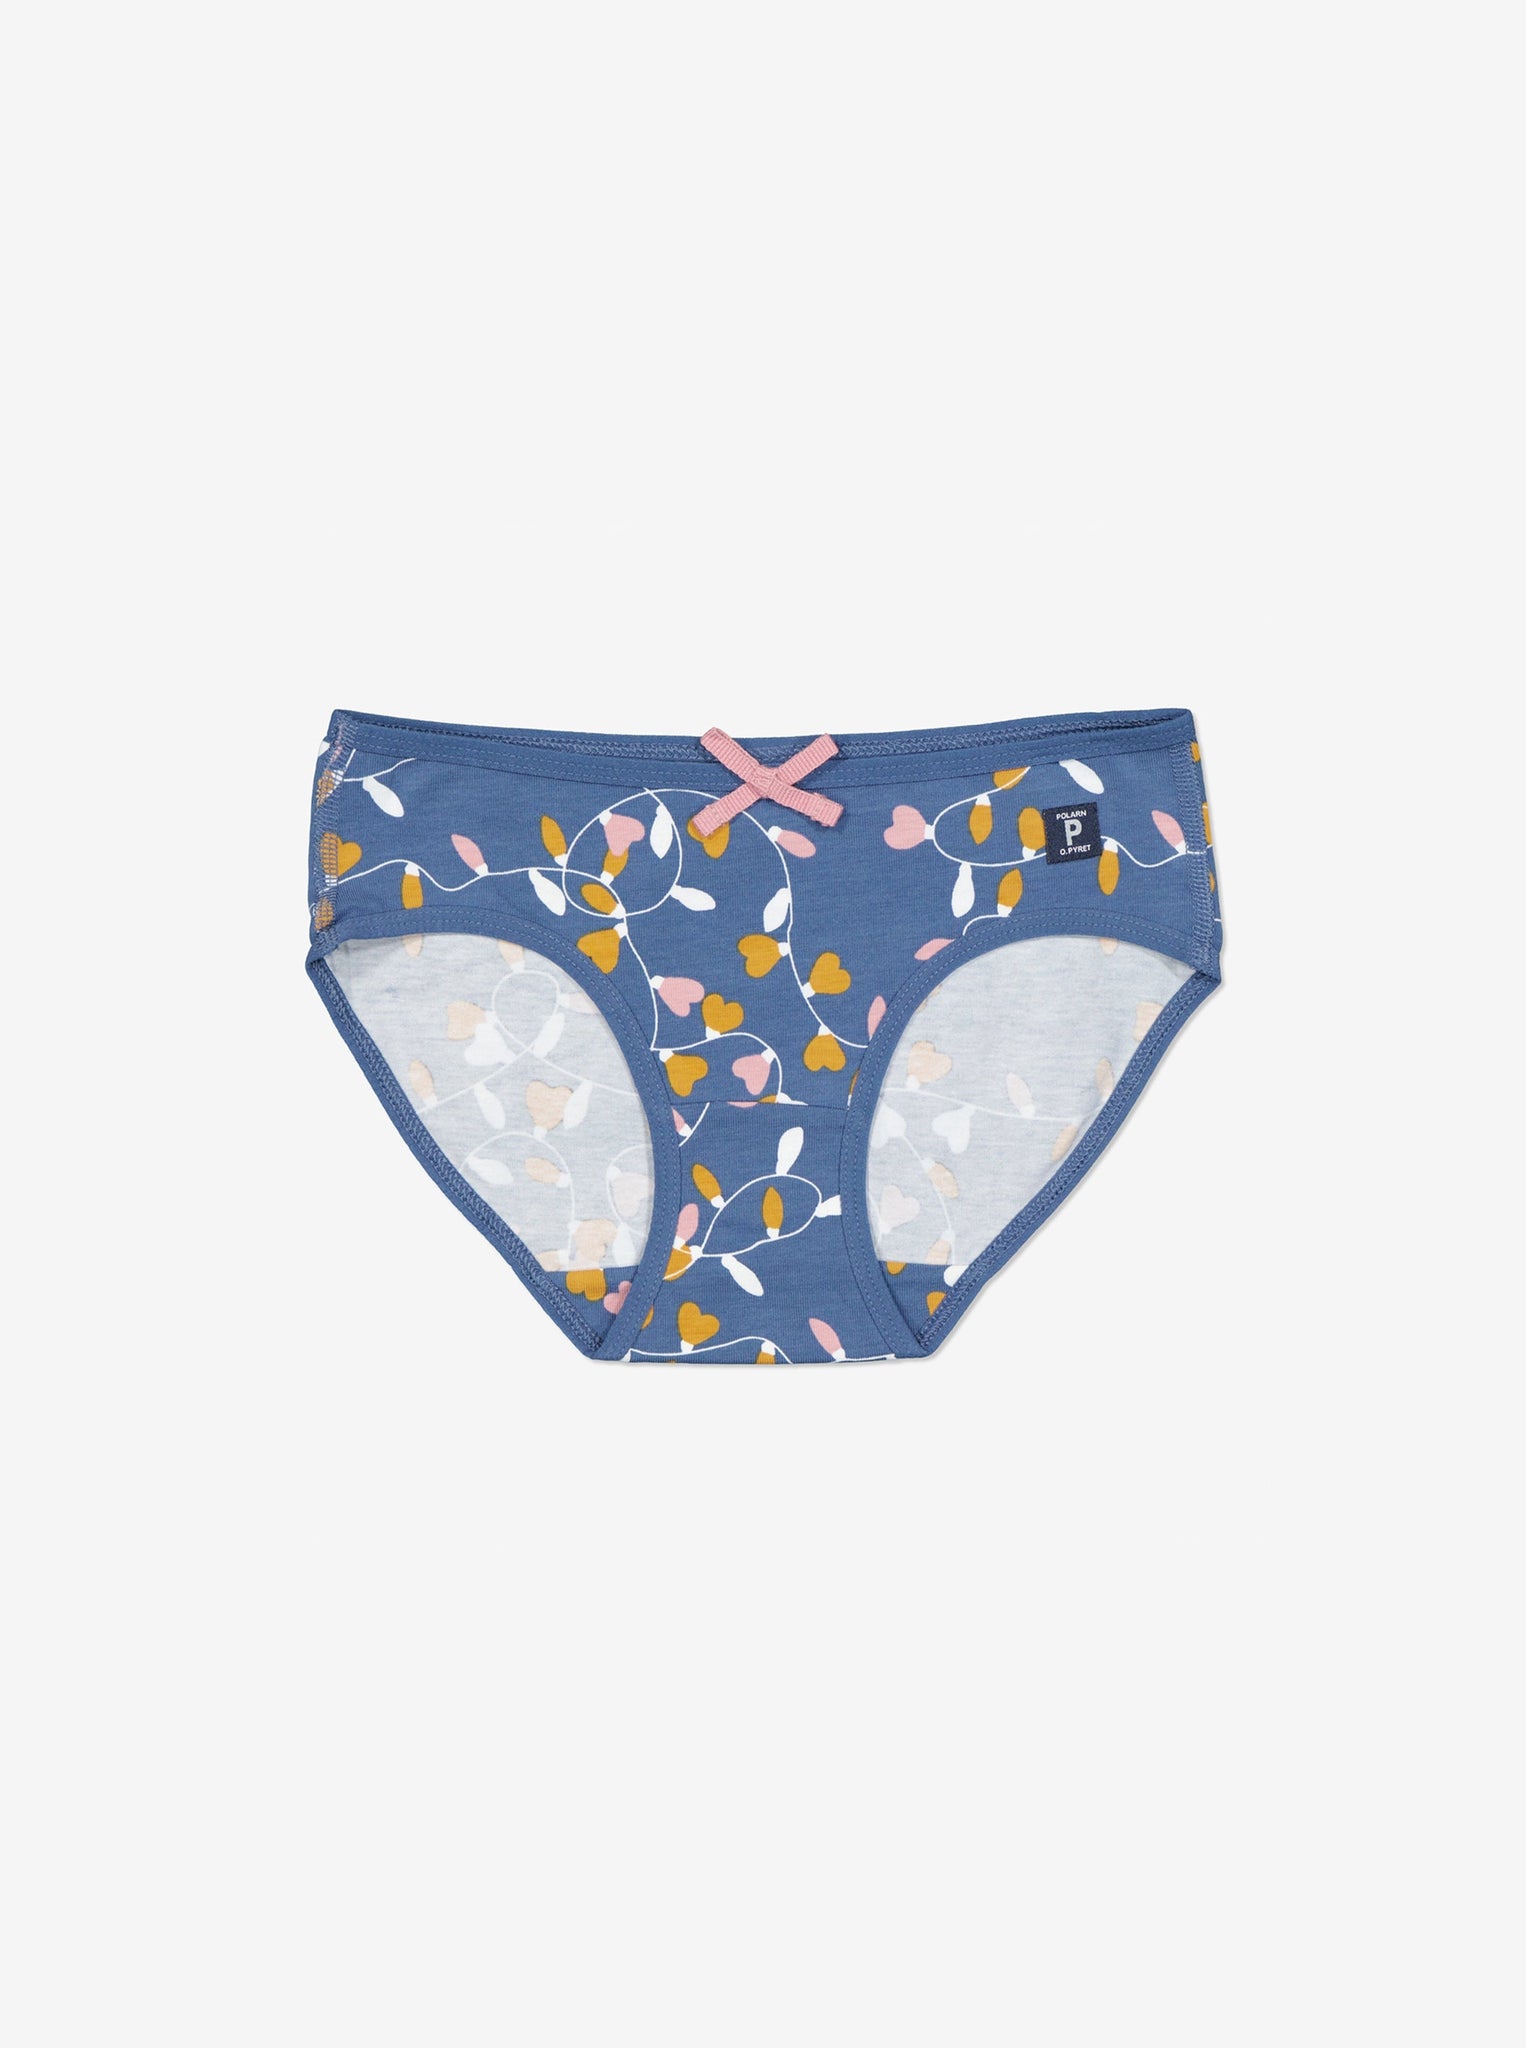 Blue Organic Cotton Girls Briefs from the Polarn O. Pyret kidswear collection. Clothes made using sustainably sourced materials.